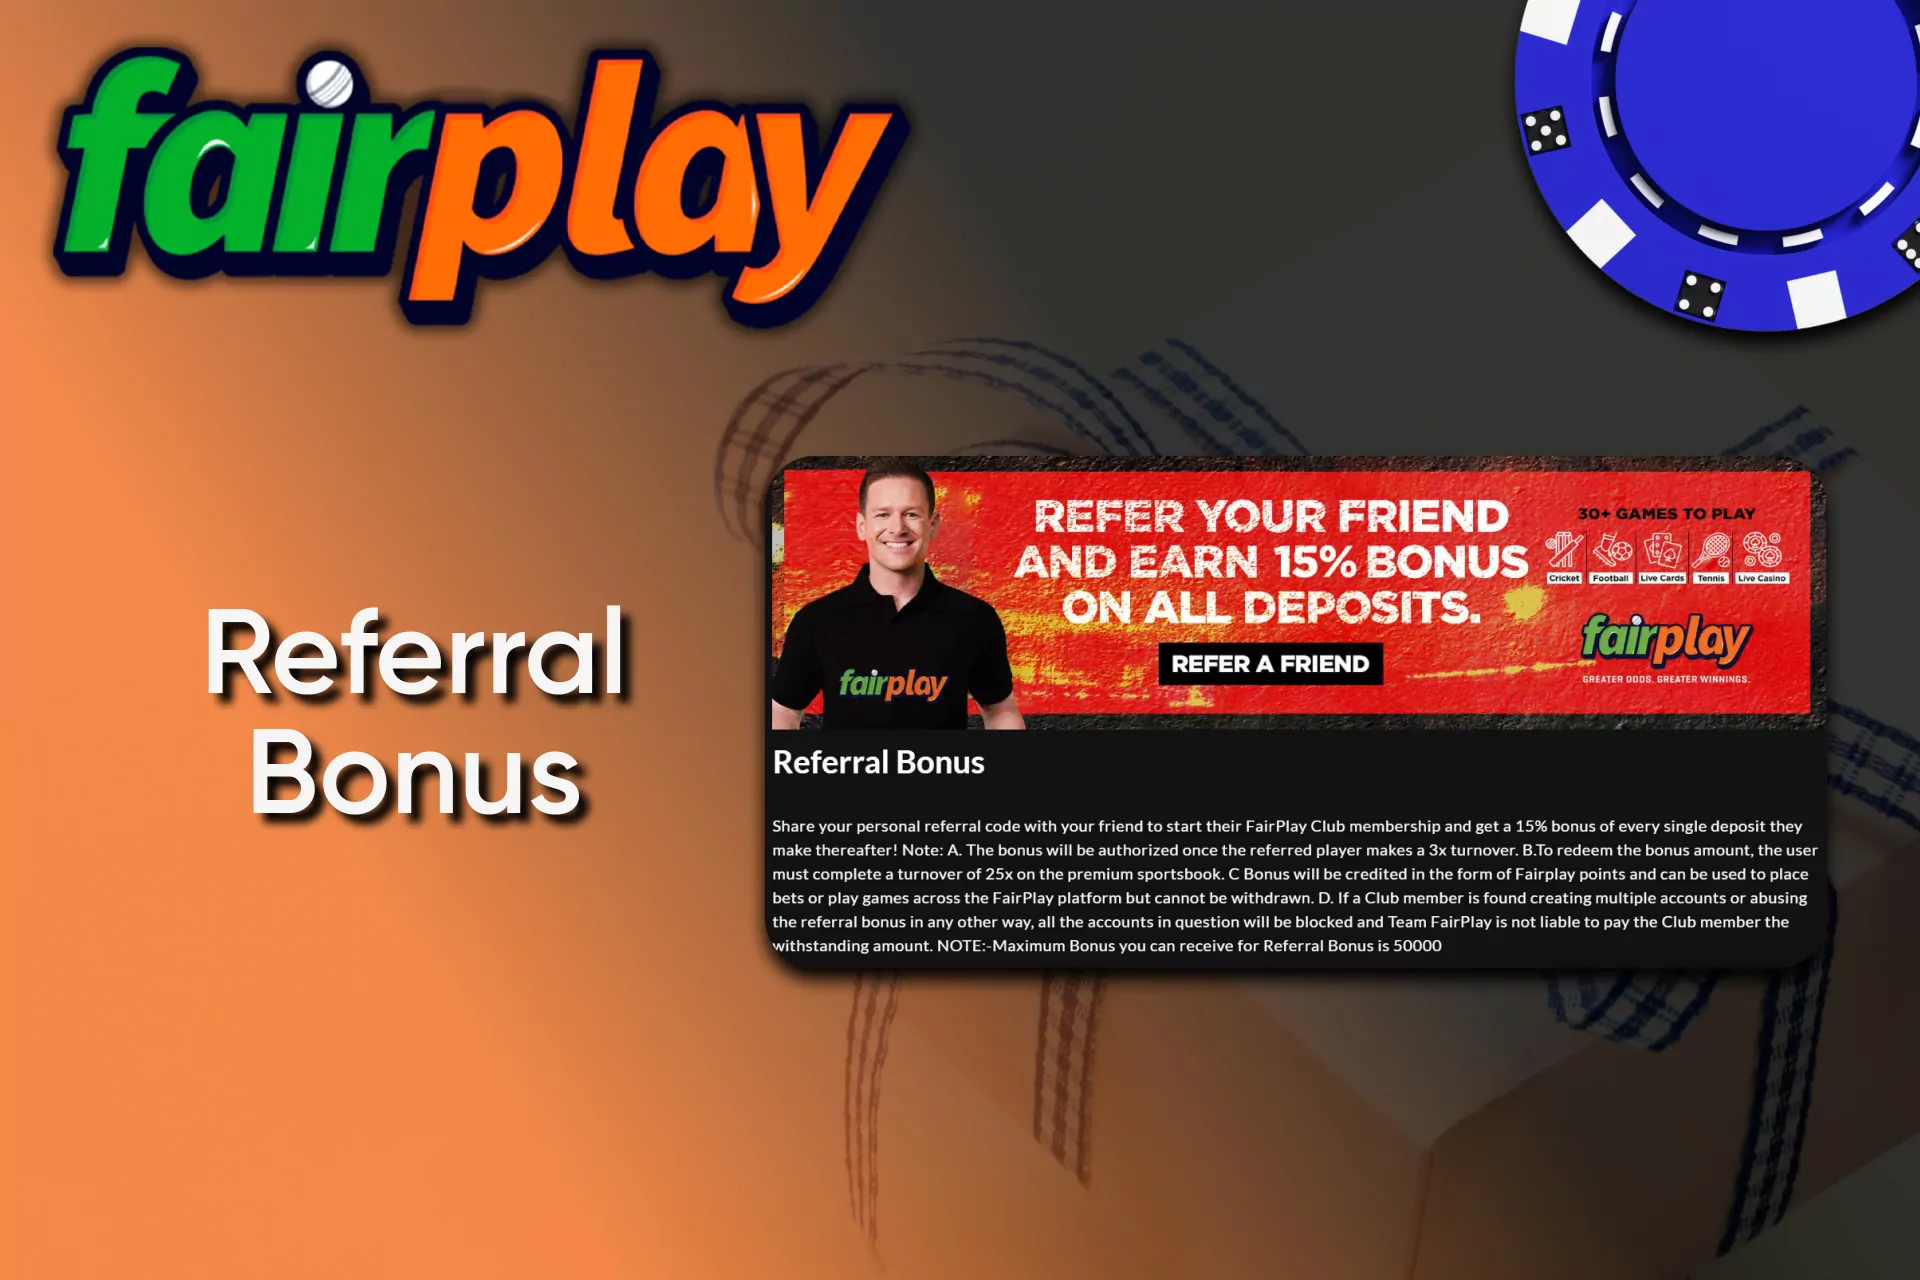 Invite friends to join you on Fairplay and get a bonus.